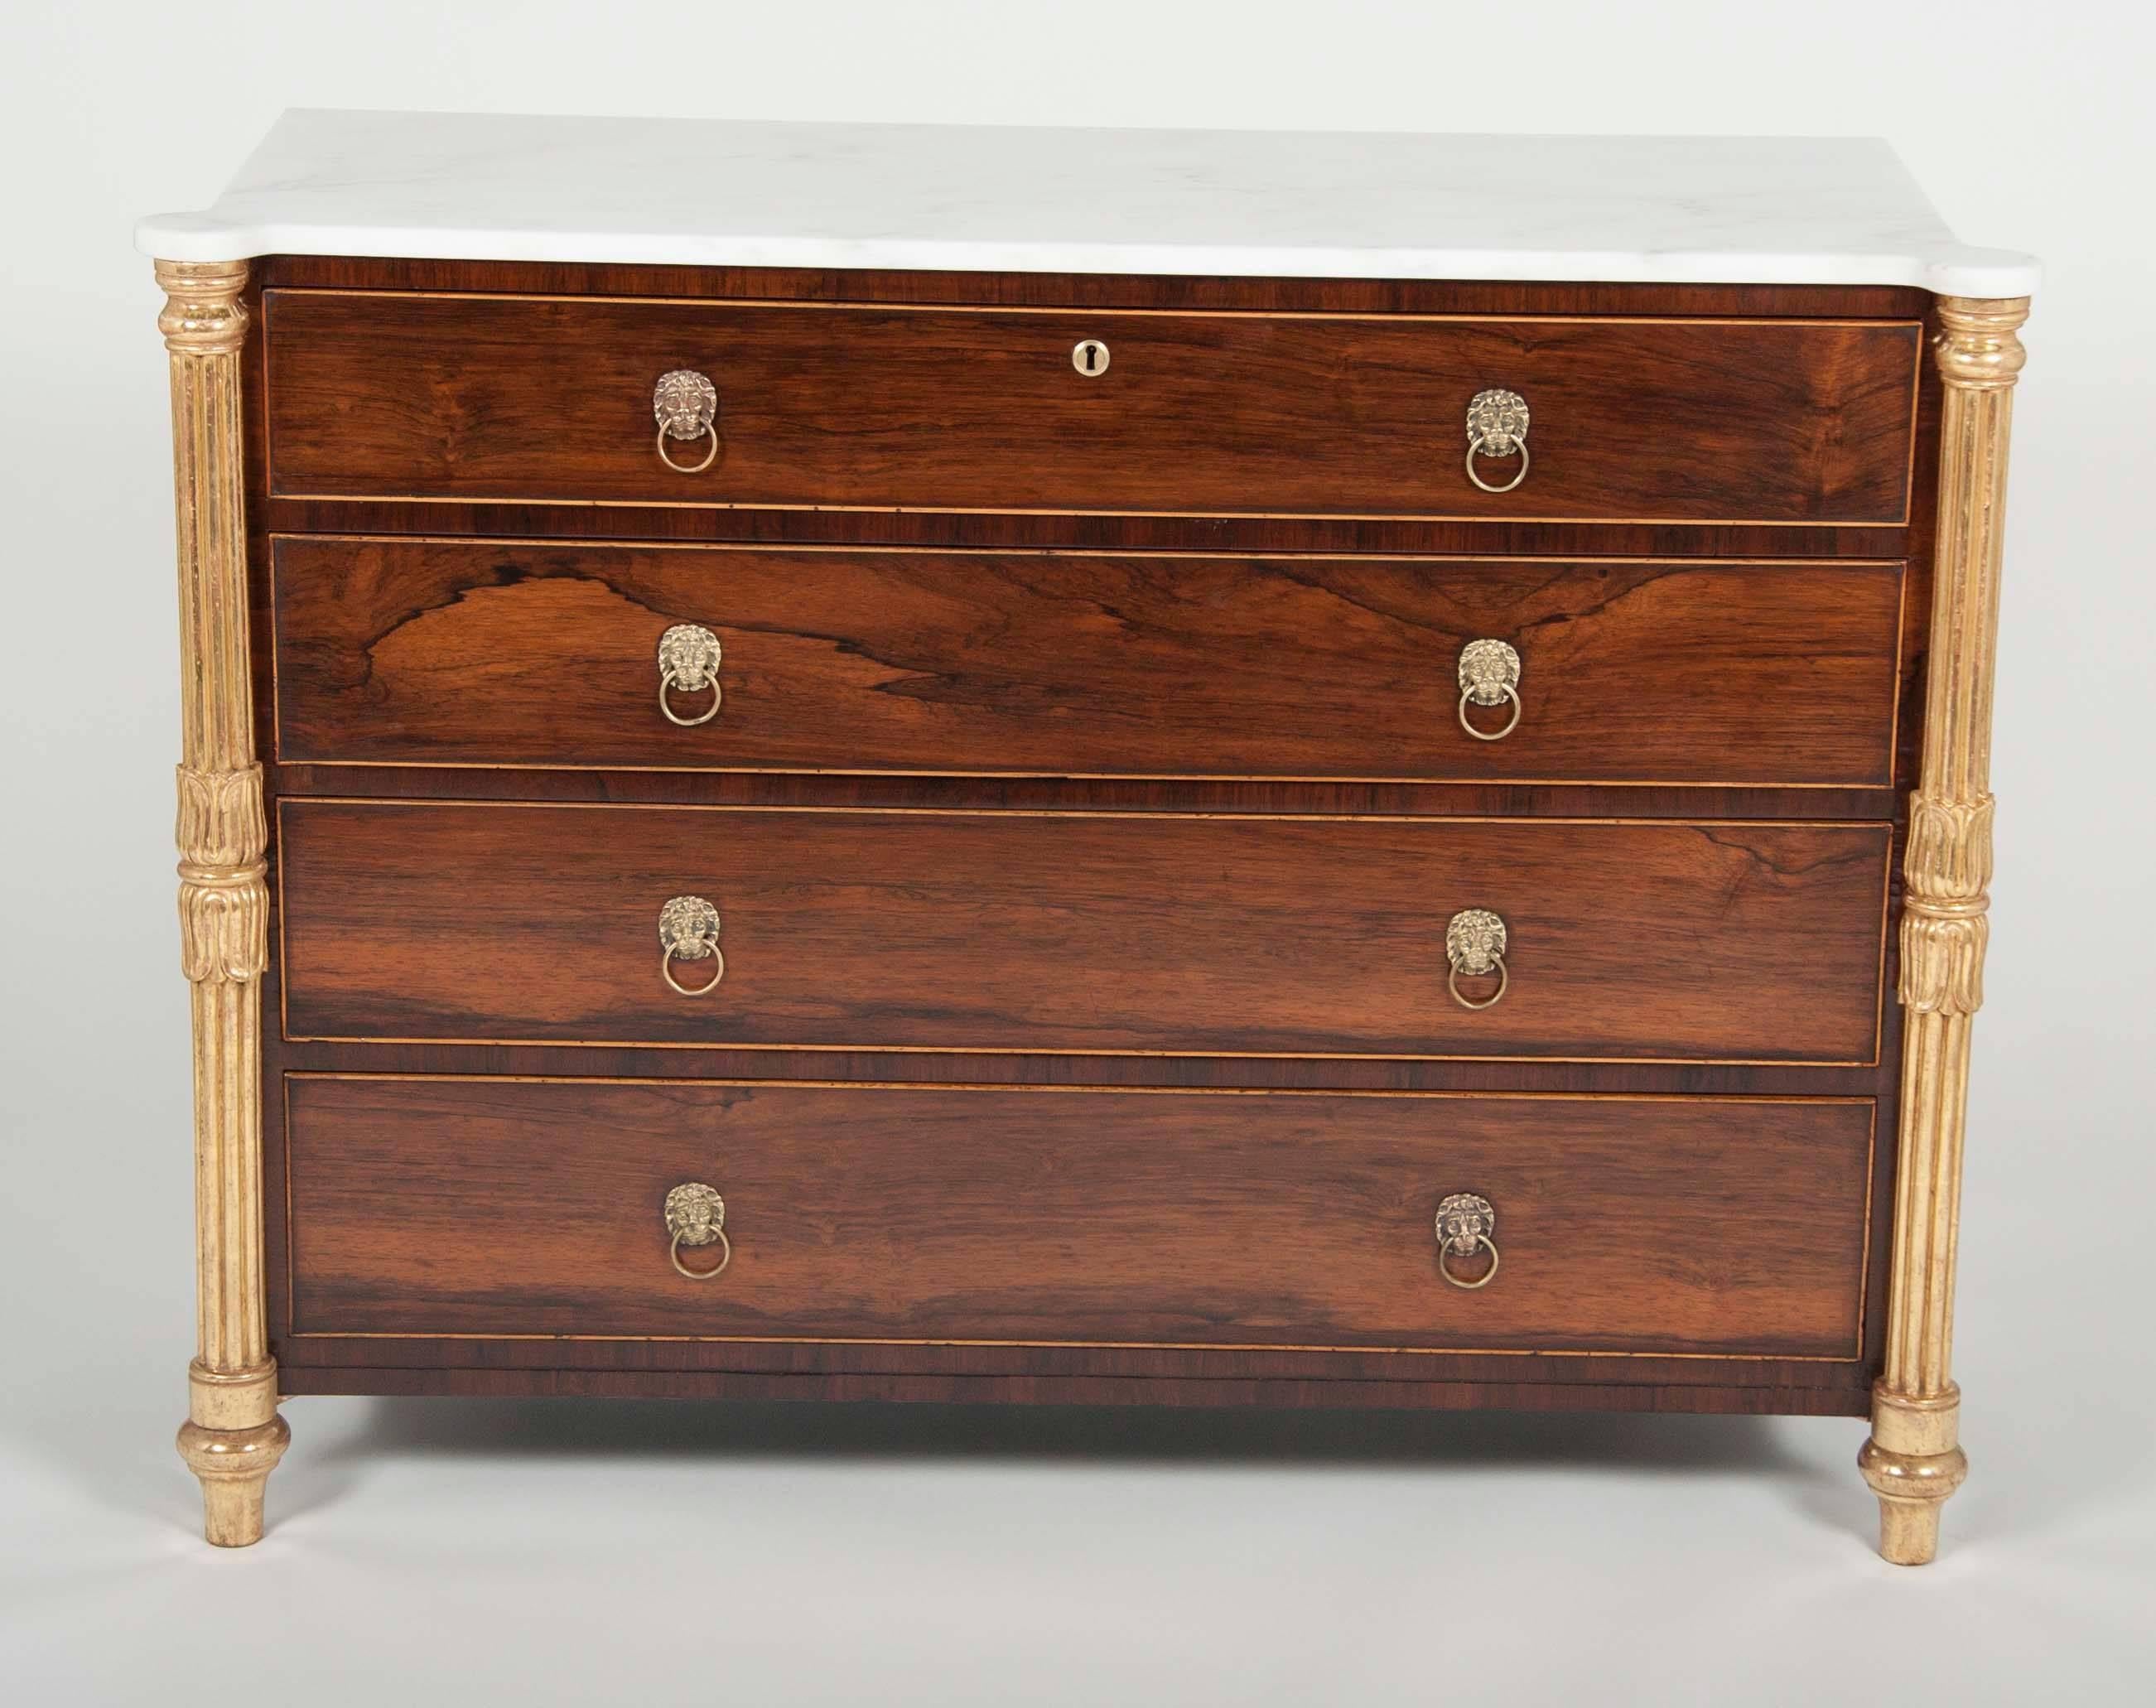 A beautiful George IV parcel-gilt rosewood chest of drawers with lotus flower carved columns and white marble top.
Newly restored or new top.